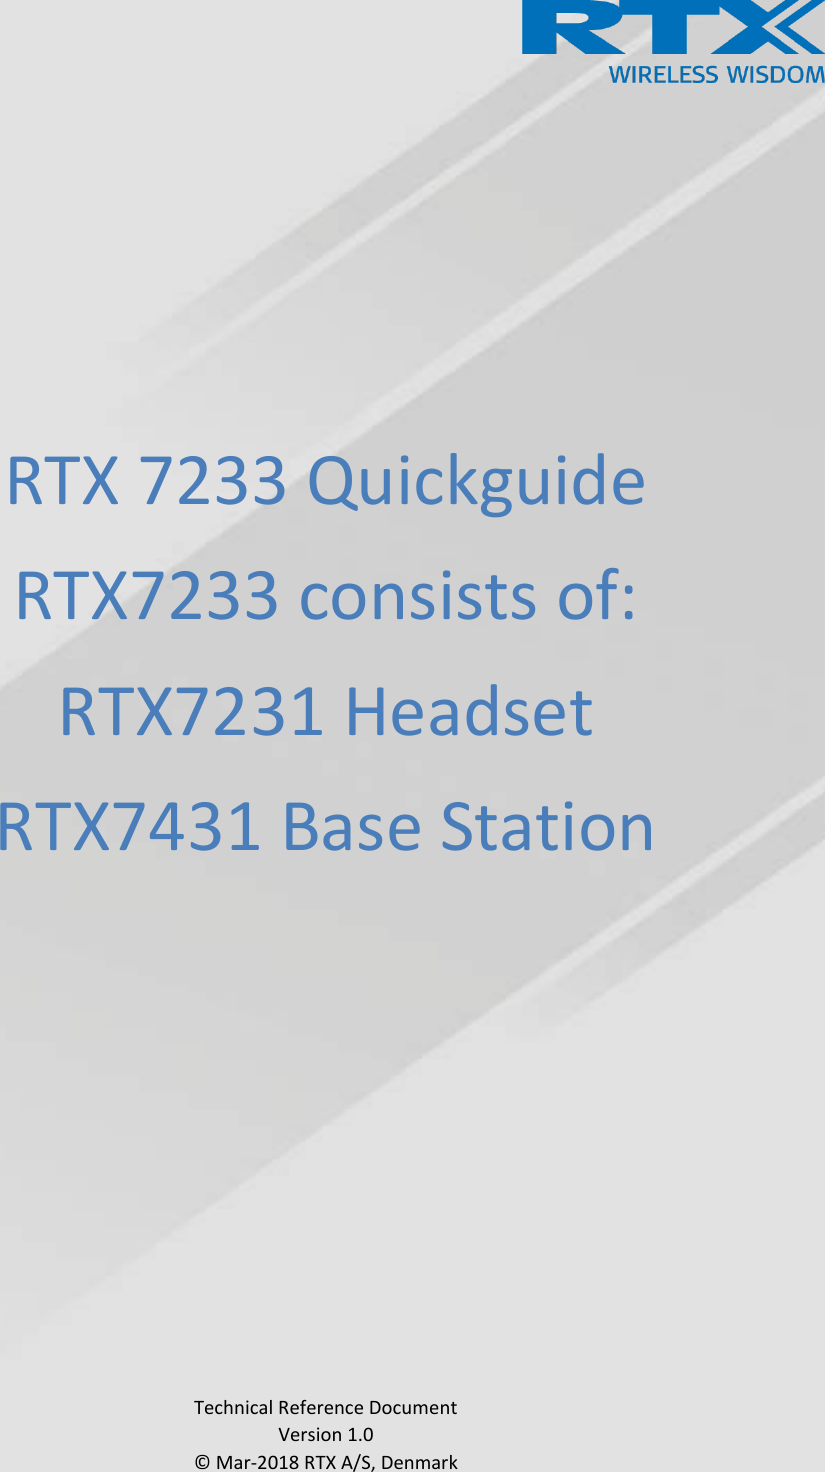      RTX 7233 Quickguide RTX7233 consists of: RTX7231 Headset RTX7431 Base Station                Technical Reference Document Version 1.0 © Mar-2018 RTX A/S, Denmark 